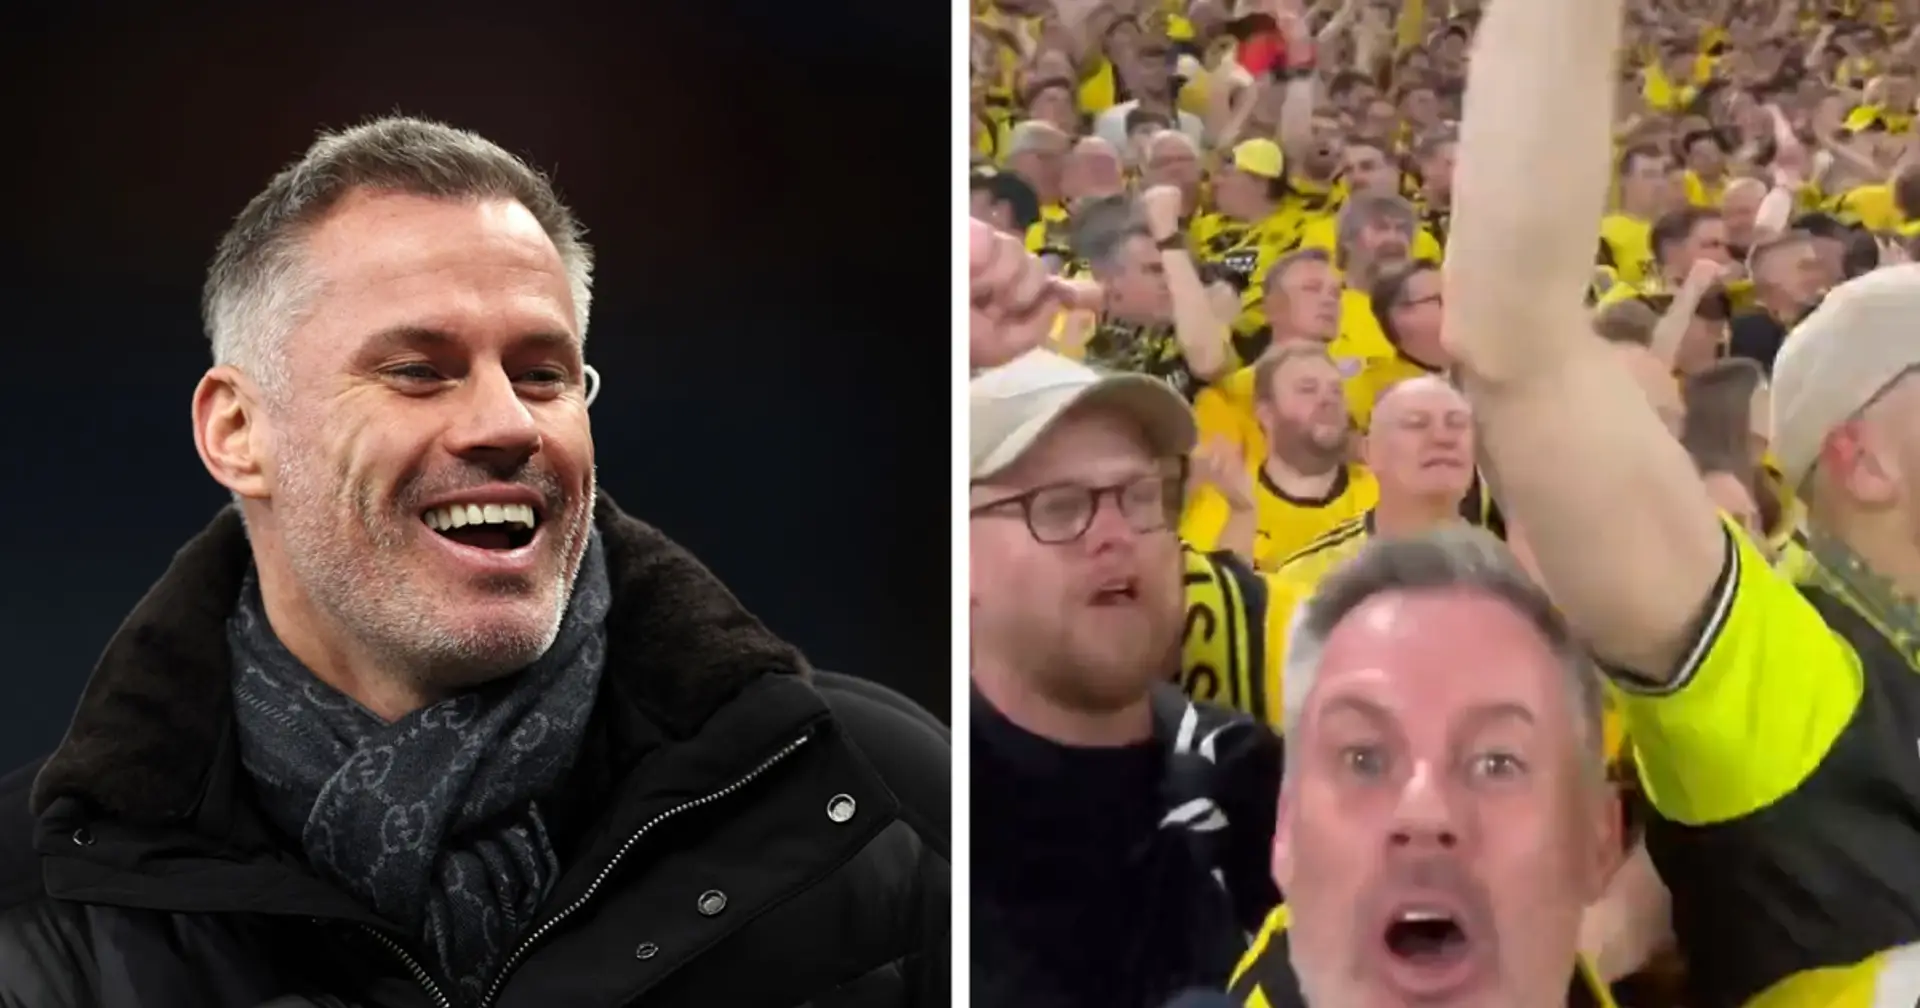 A new Dortmund fan in town? Drunk and happy Jamie Carragher was living his best life with BVB fans